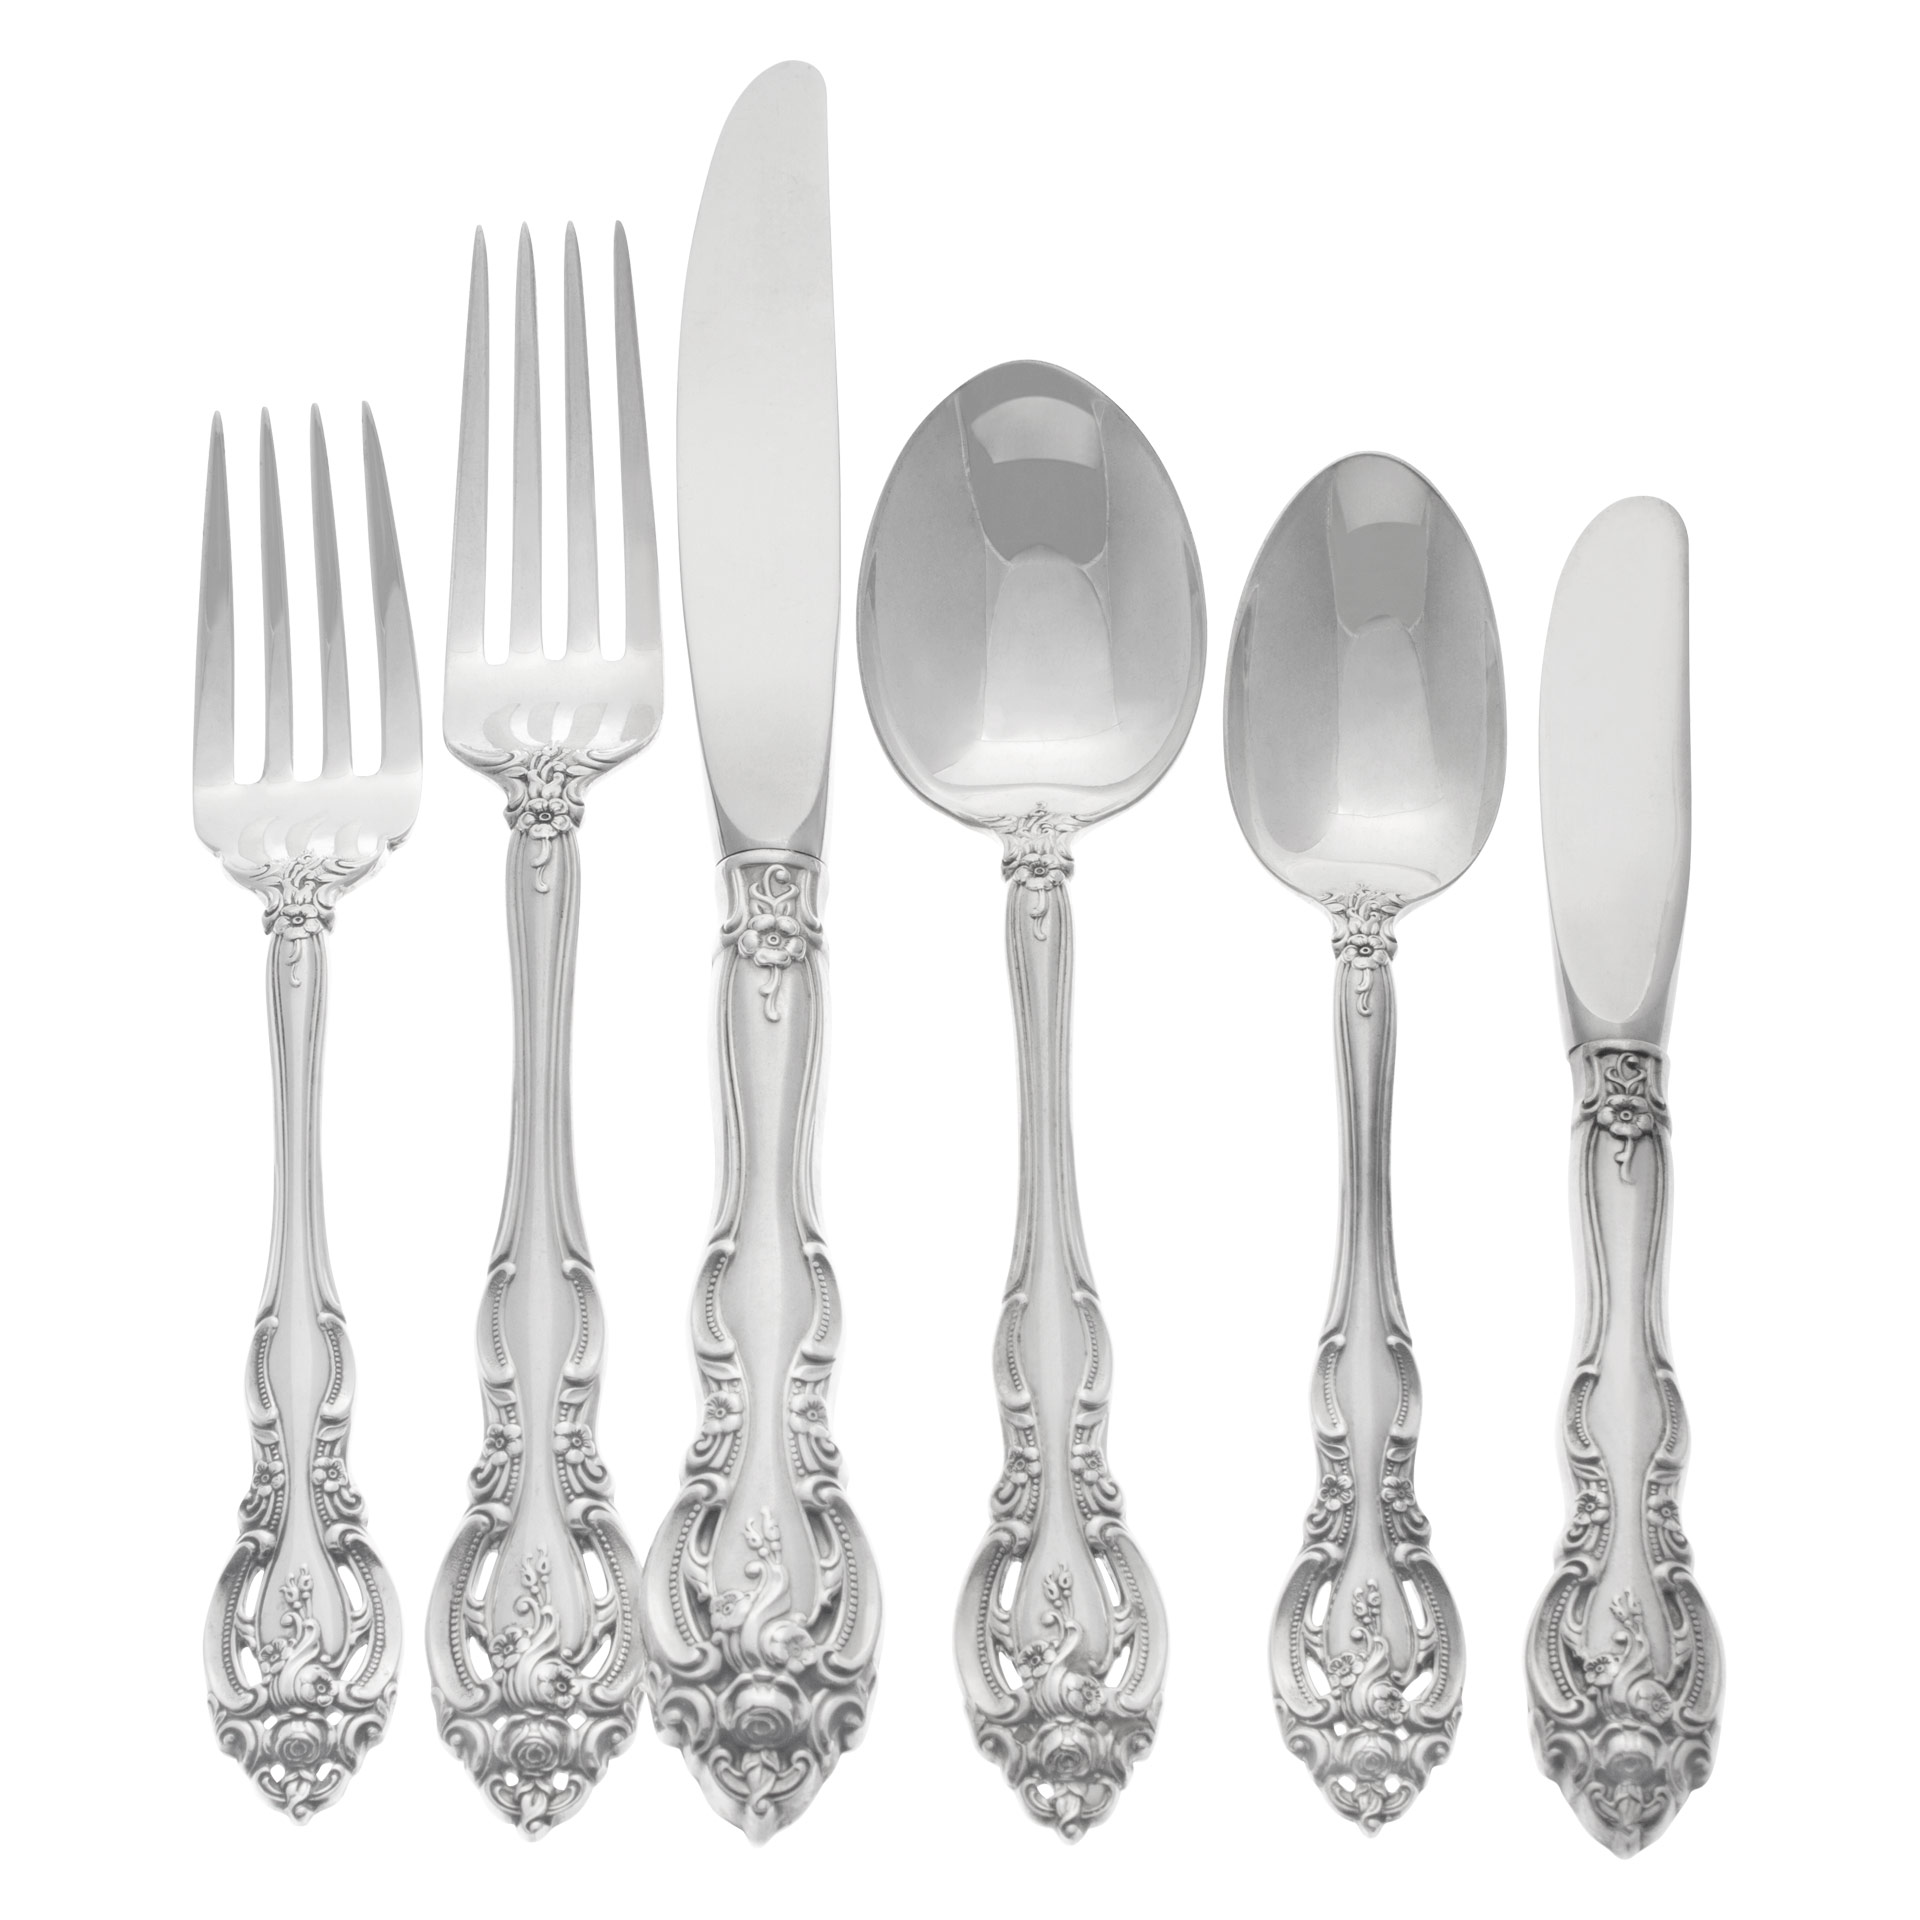 "LA SCALA" complete Sterling Silver Flatware Set, Ptd in 1964 by Gorham- 10 Place Set for 12 +11 Serving Pieces. Over 3800 sterling silver. image 1